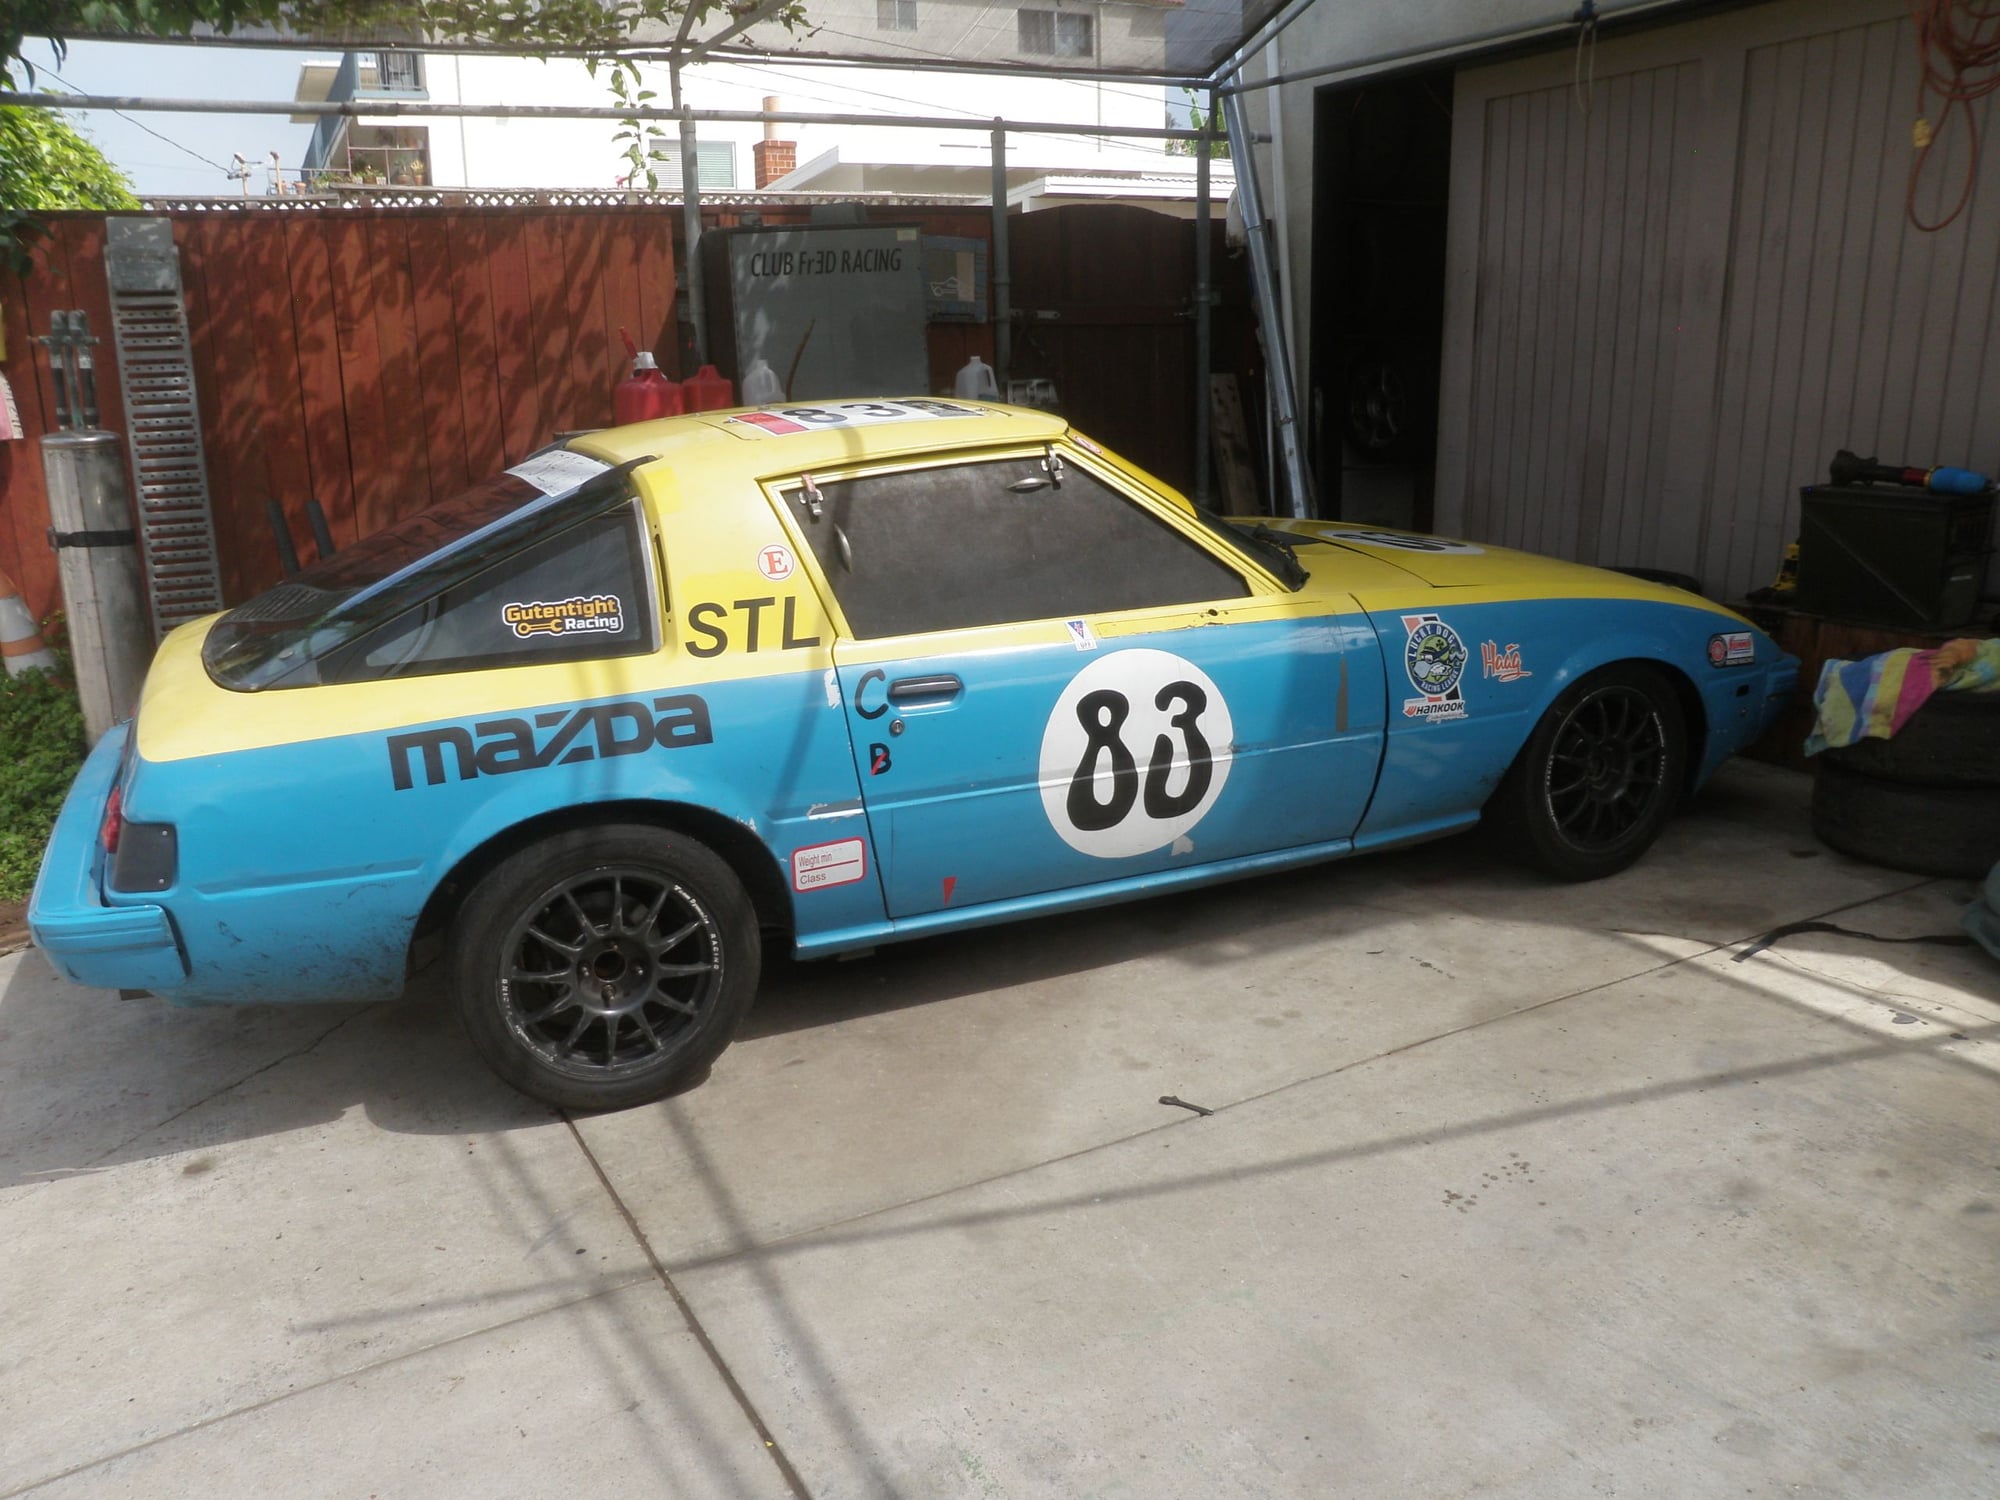 1982 Mazda RX-7 - For Sale – 1982 Mazda RX7 Race Car plus Many, Many Spares - Used - VIN JM1FB331200637180 - Cardiff By The Sea, CA 92007, United States